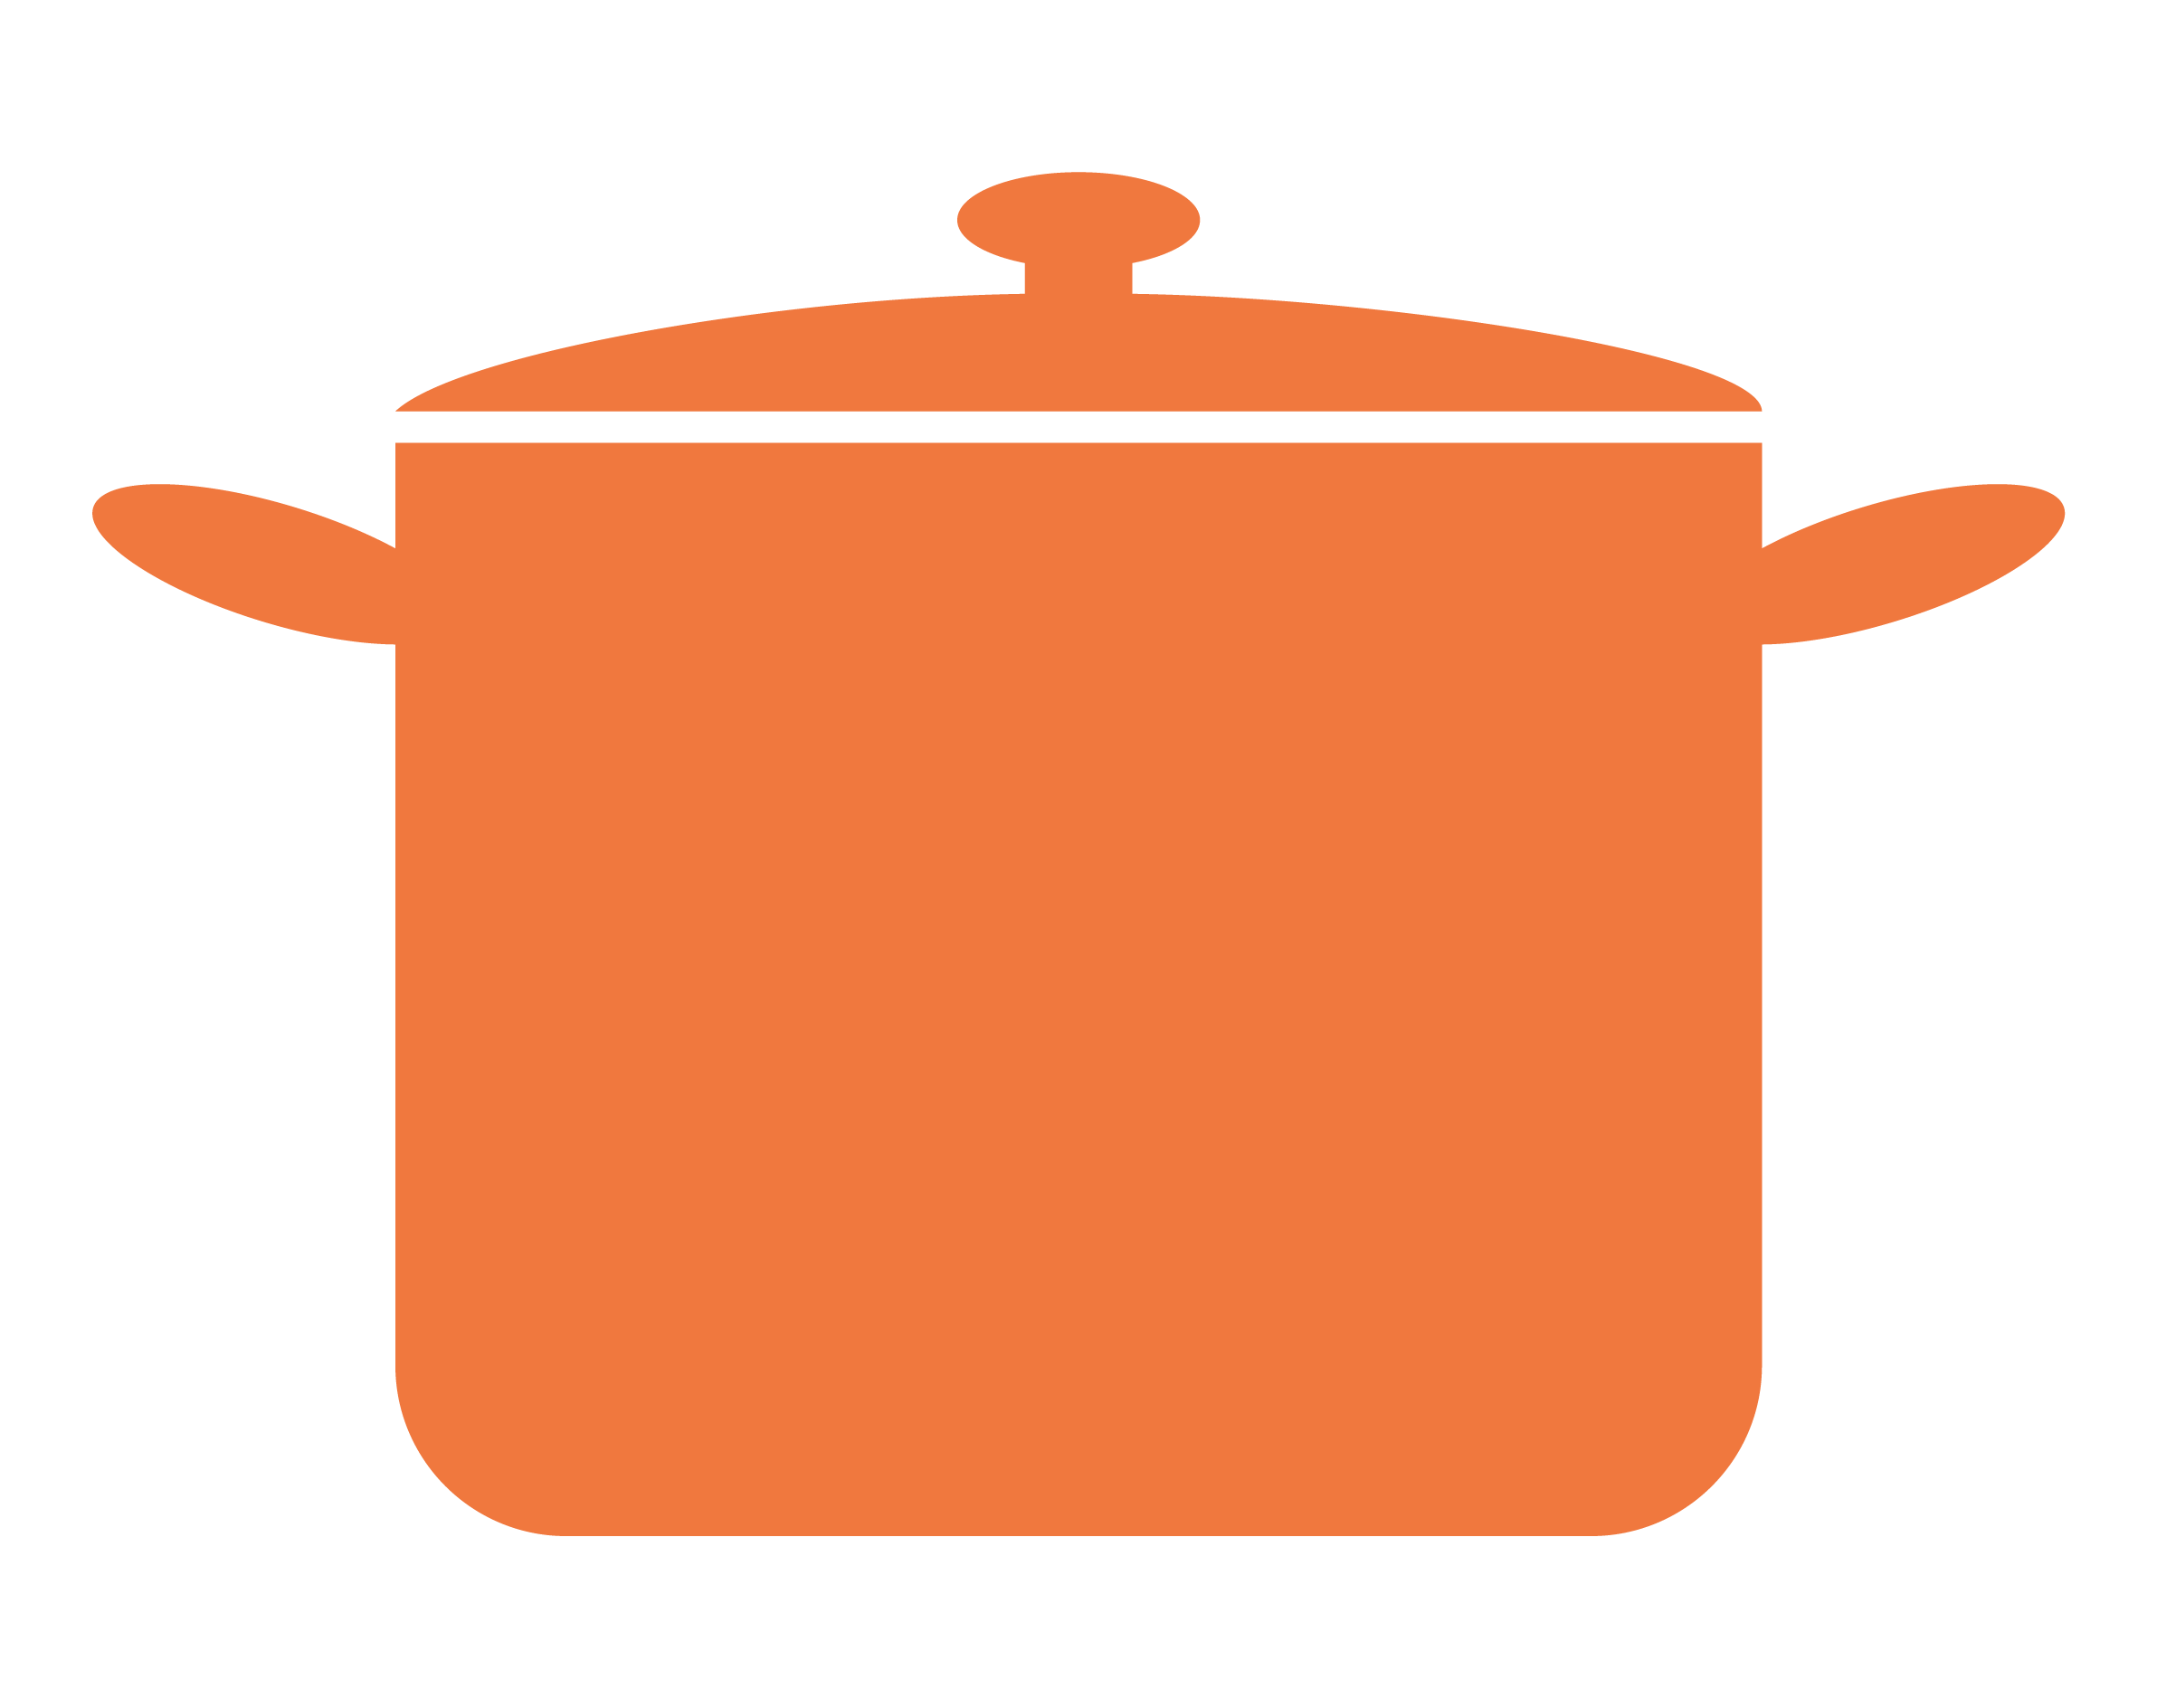 16,500+ Soup Pot Stock Illustrations, Royalty-Free Vector Graphics